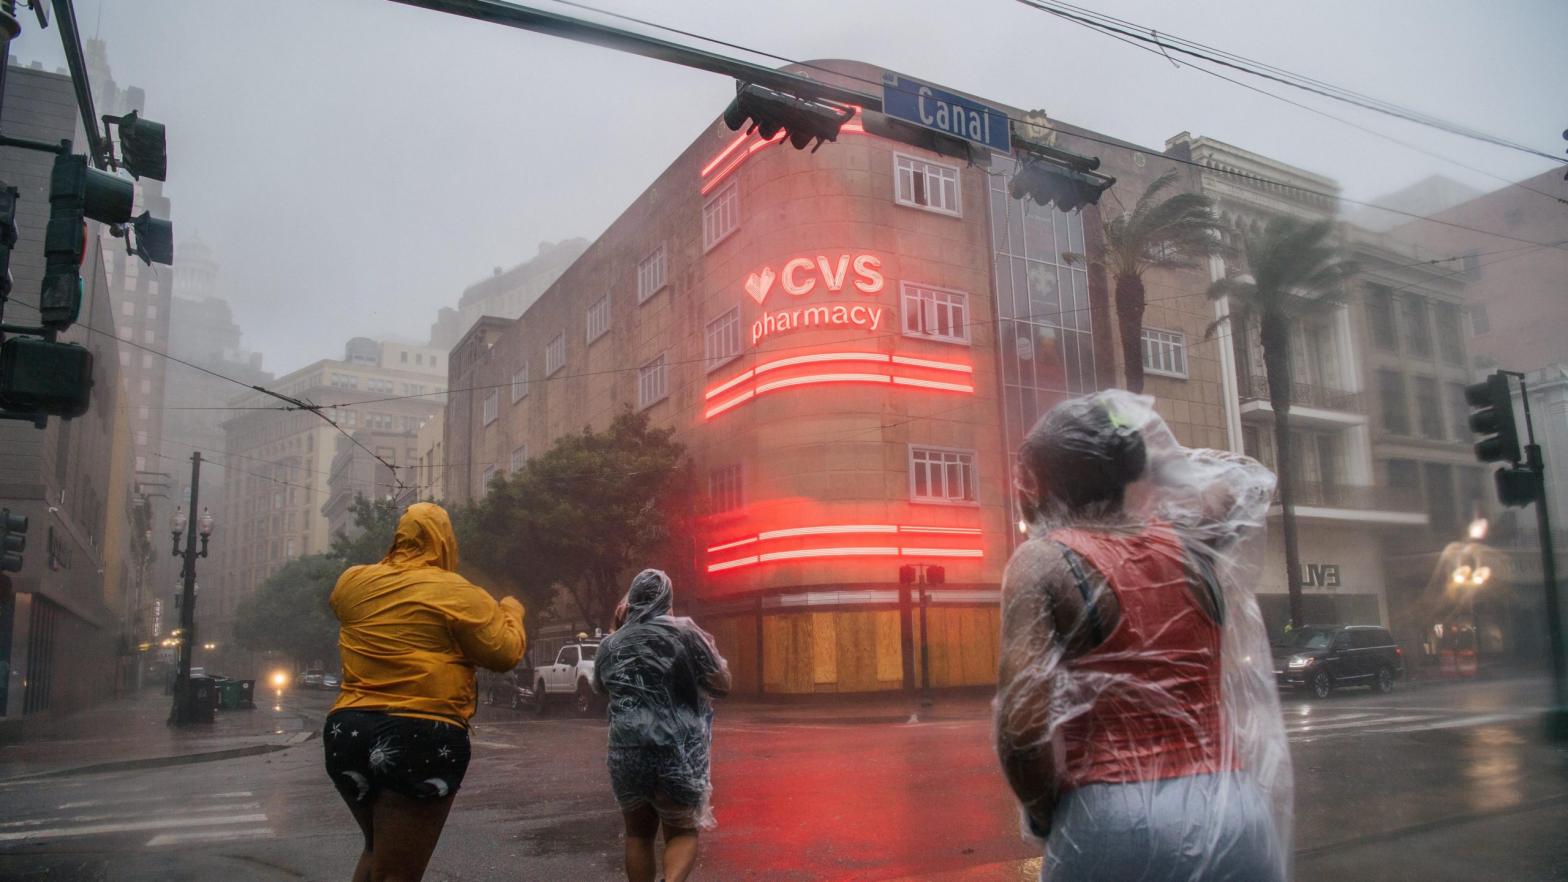 A group of people cross an intersection during Hurricane Ida on August 29, 2021 in New Orleans, Louisiana. (Photo: Brandon Bell, Getty Images)